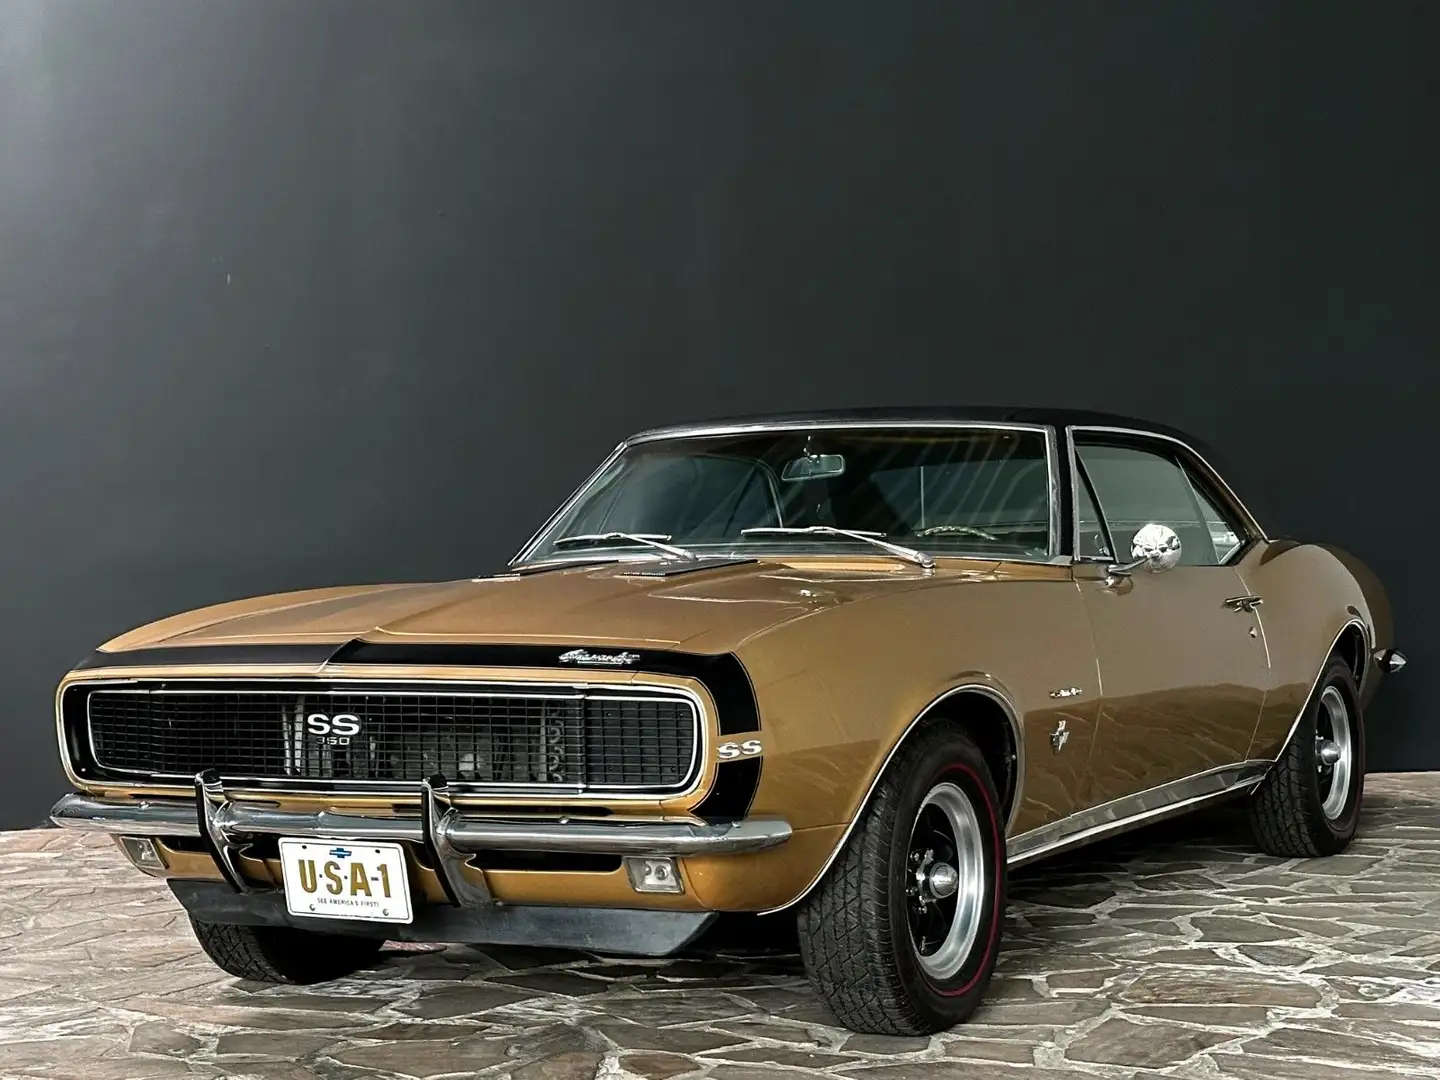 Chevrolet Camaro SS 350 CID TURBO-FIRE MATCHING NUMBERS Gold - 1